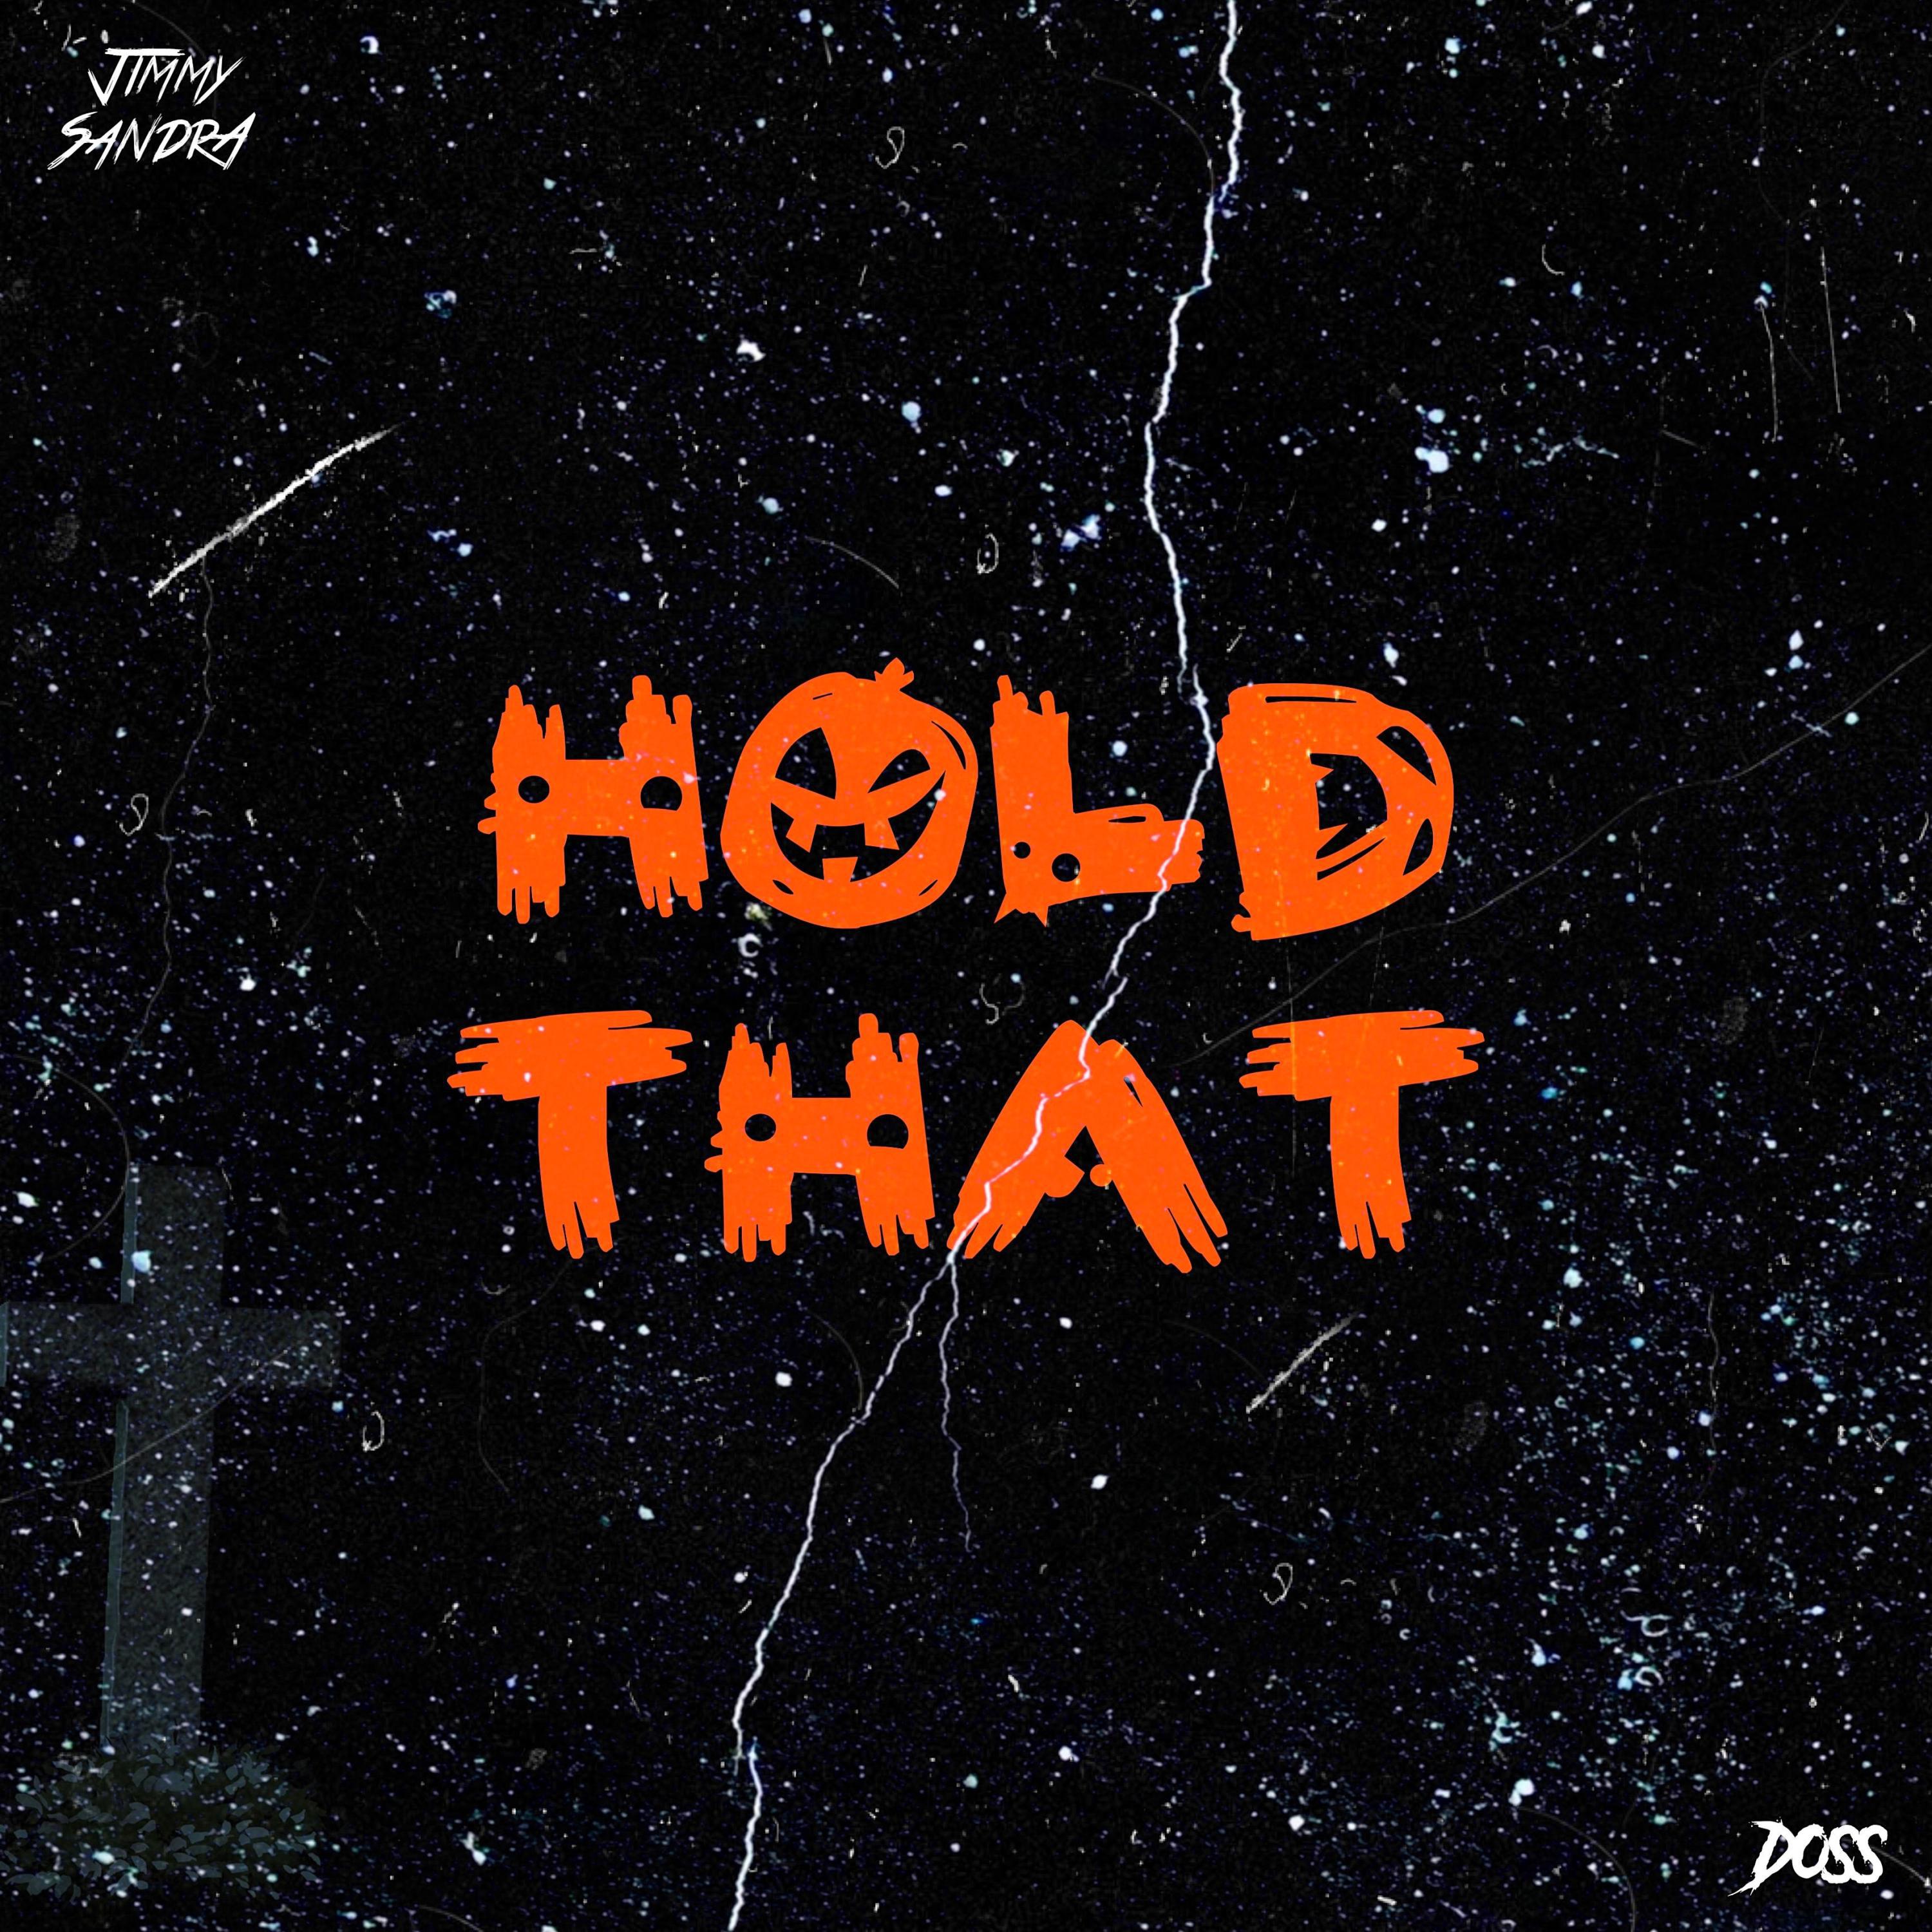 Jimmy Sandra - Hold That (feat. Doss)